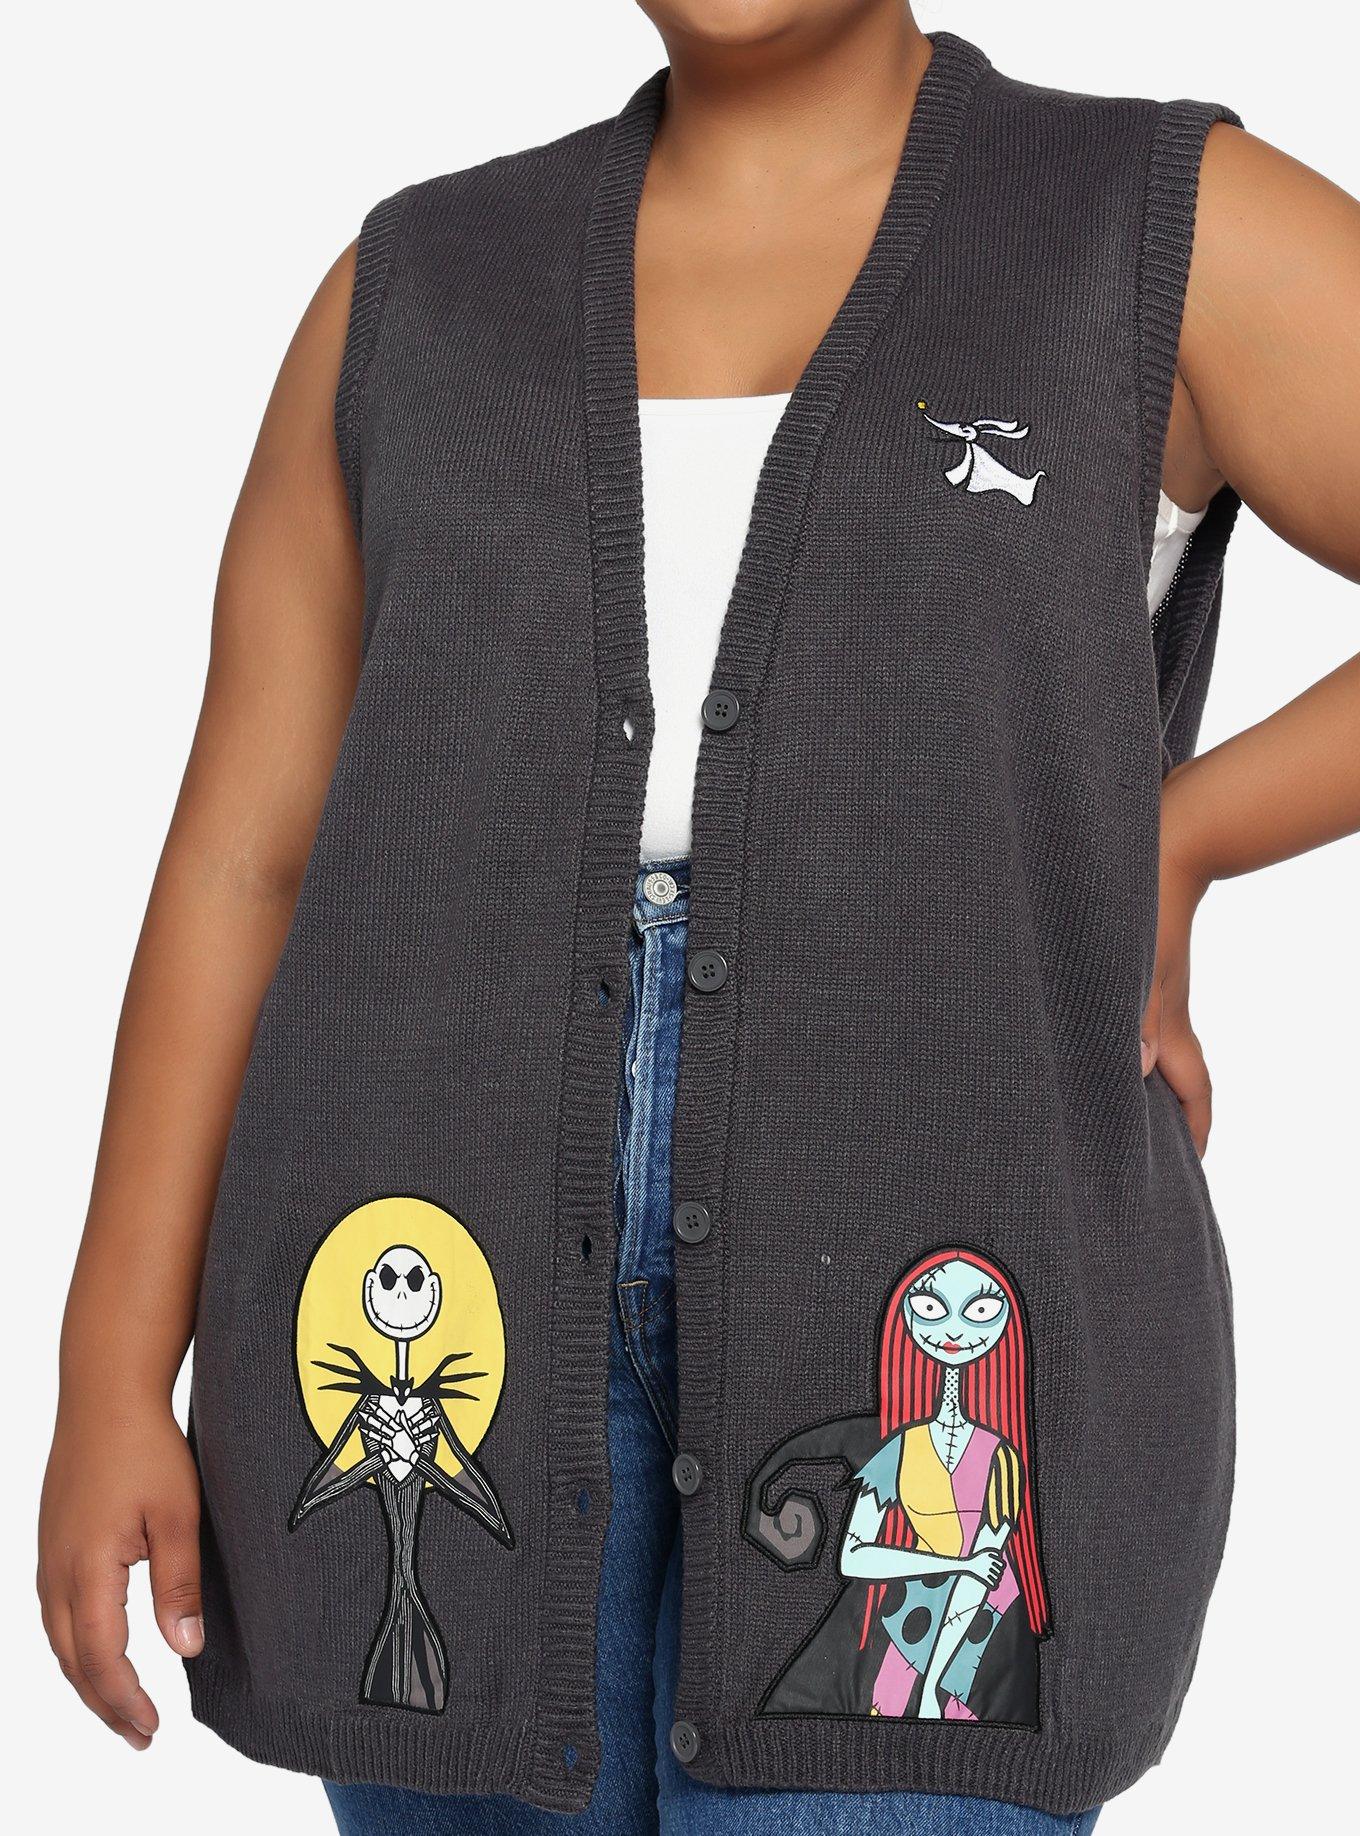 The Nightmare Before Christmas Jack & Sally Applique Girl Sweater Vest Plus Size, MULTI, hi-res